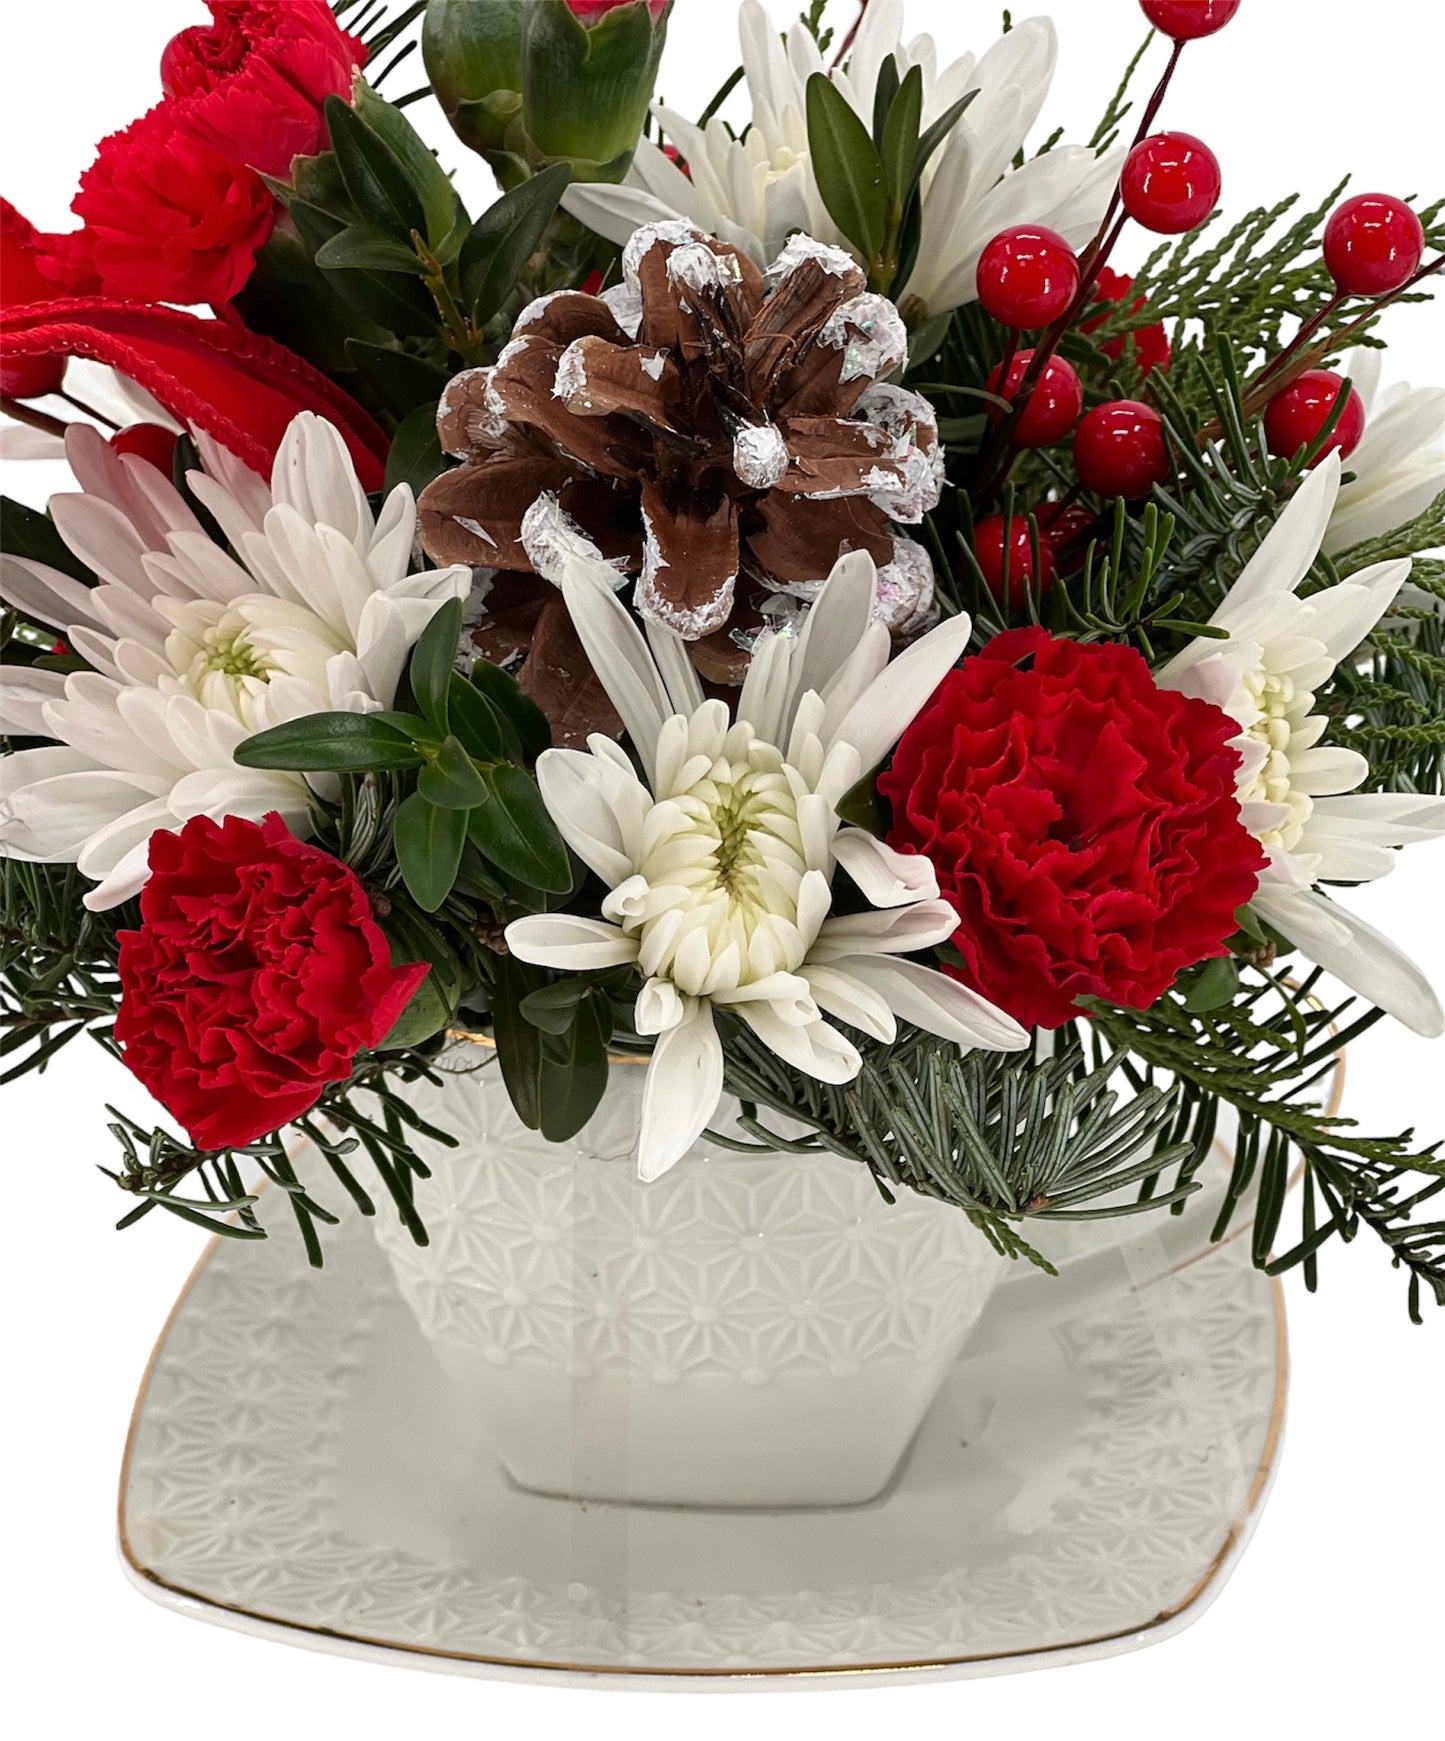 Christmas Flower, Christmas Flowers Arrangement, Delivery